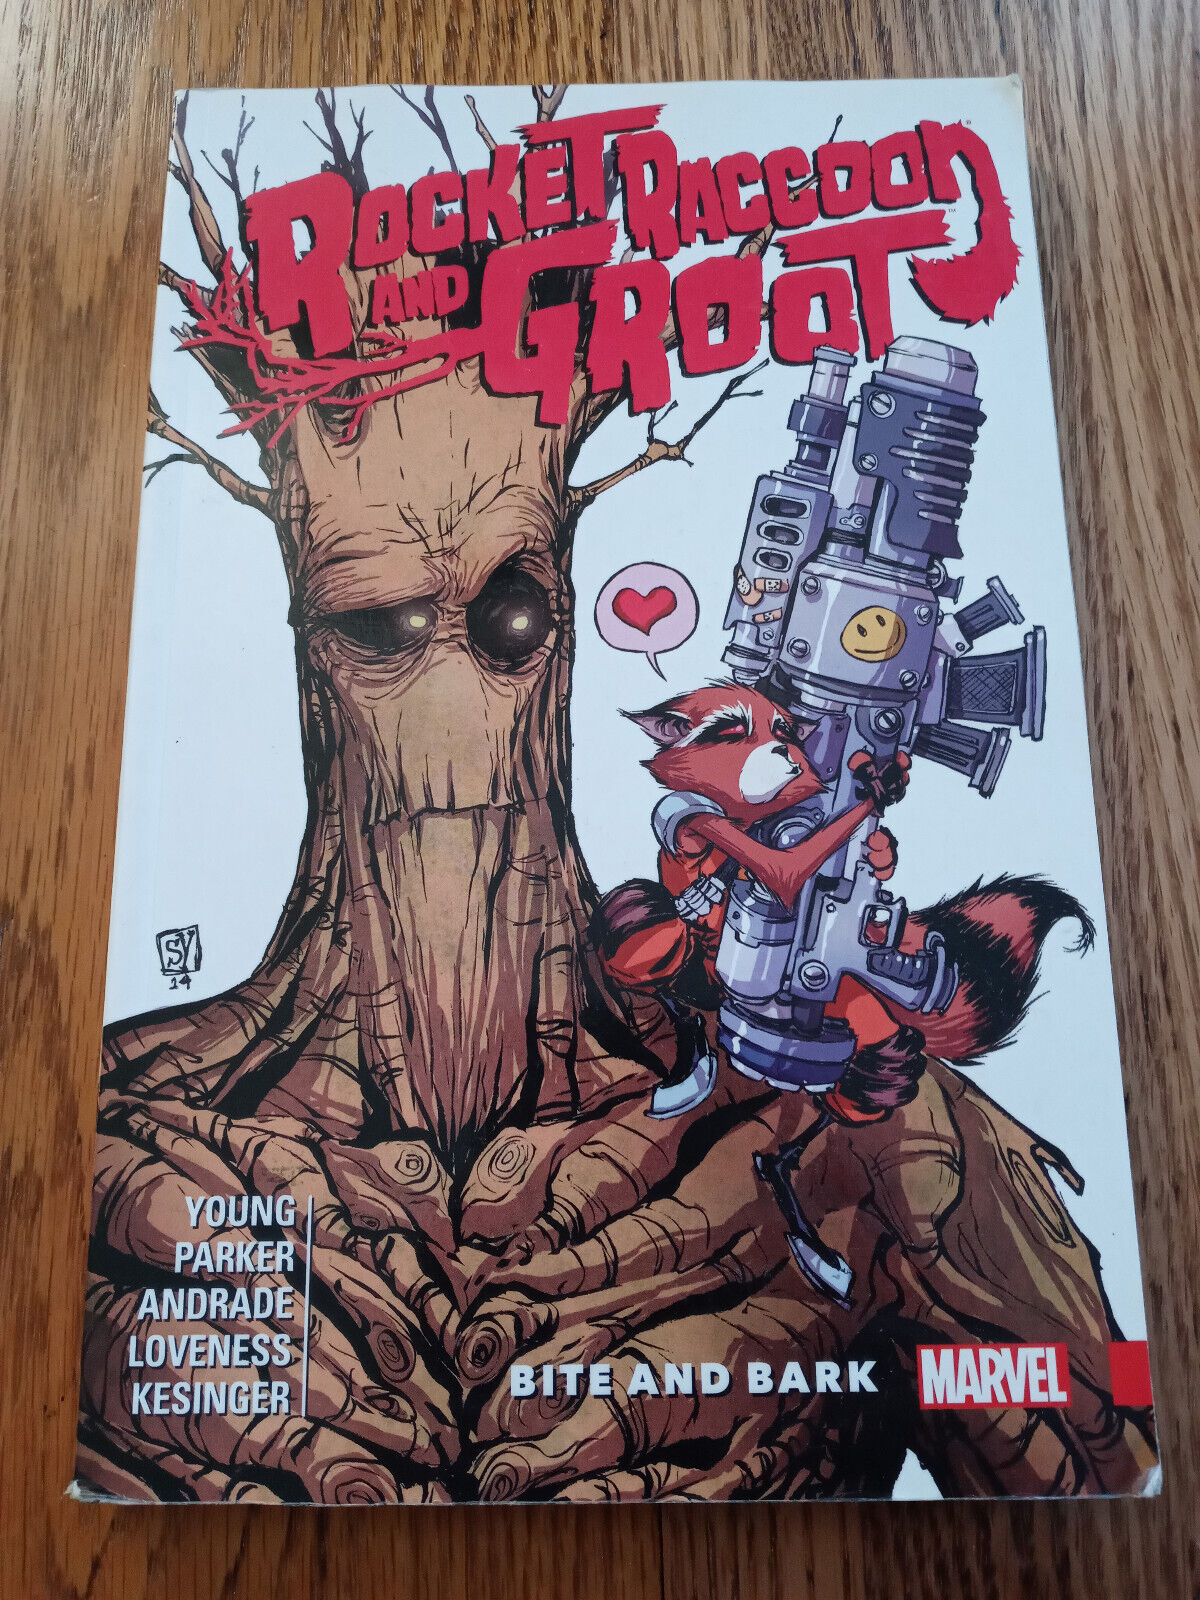 Marvel Rocket Racoon and Groot - Bite and Bark by Skottie Young (TPB, 2016)